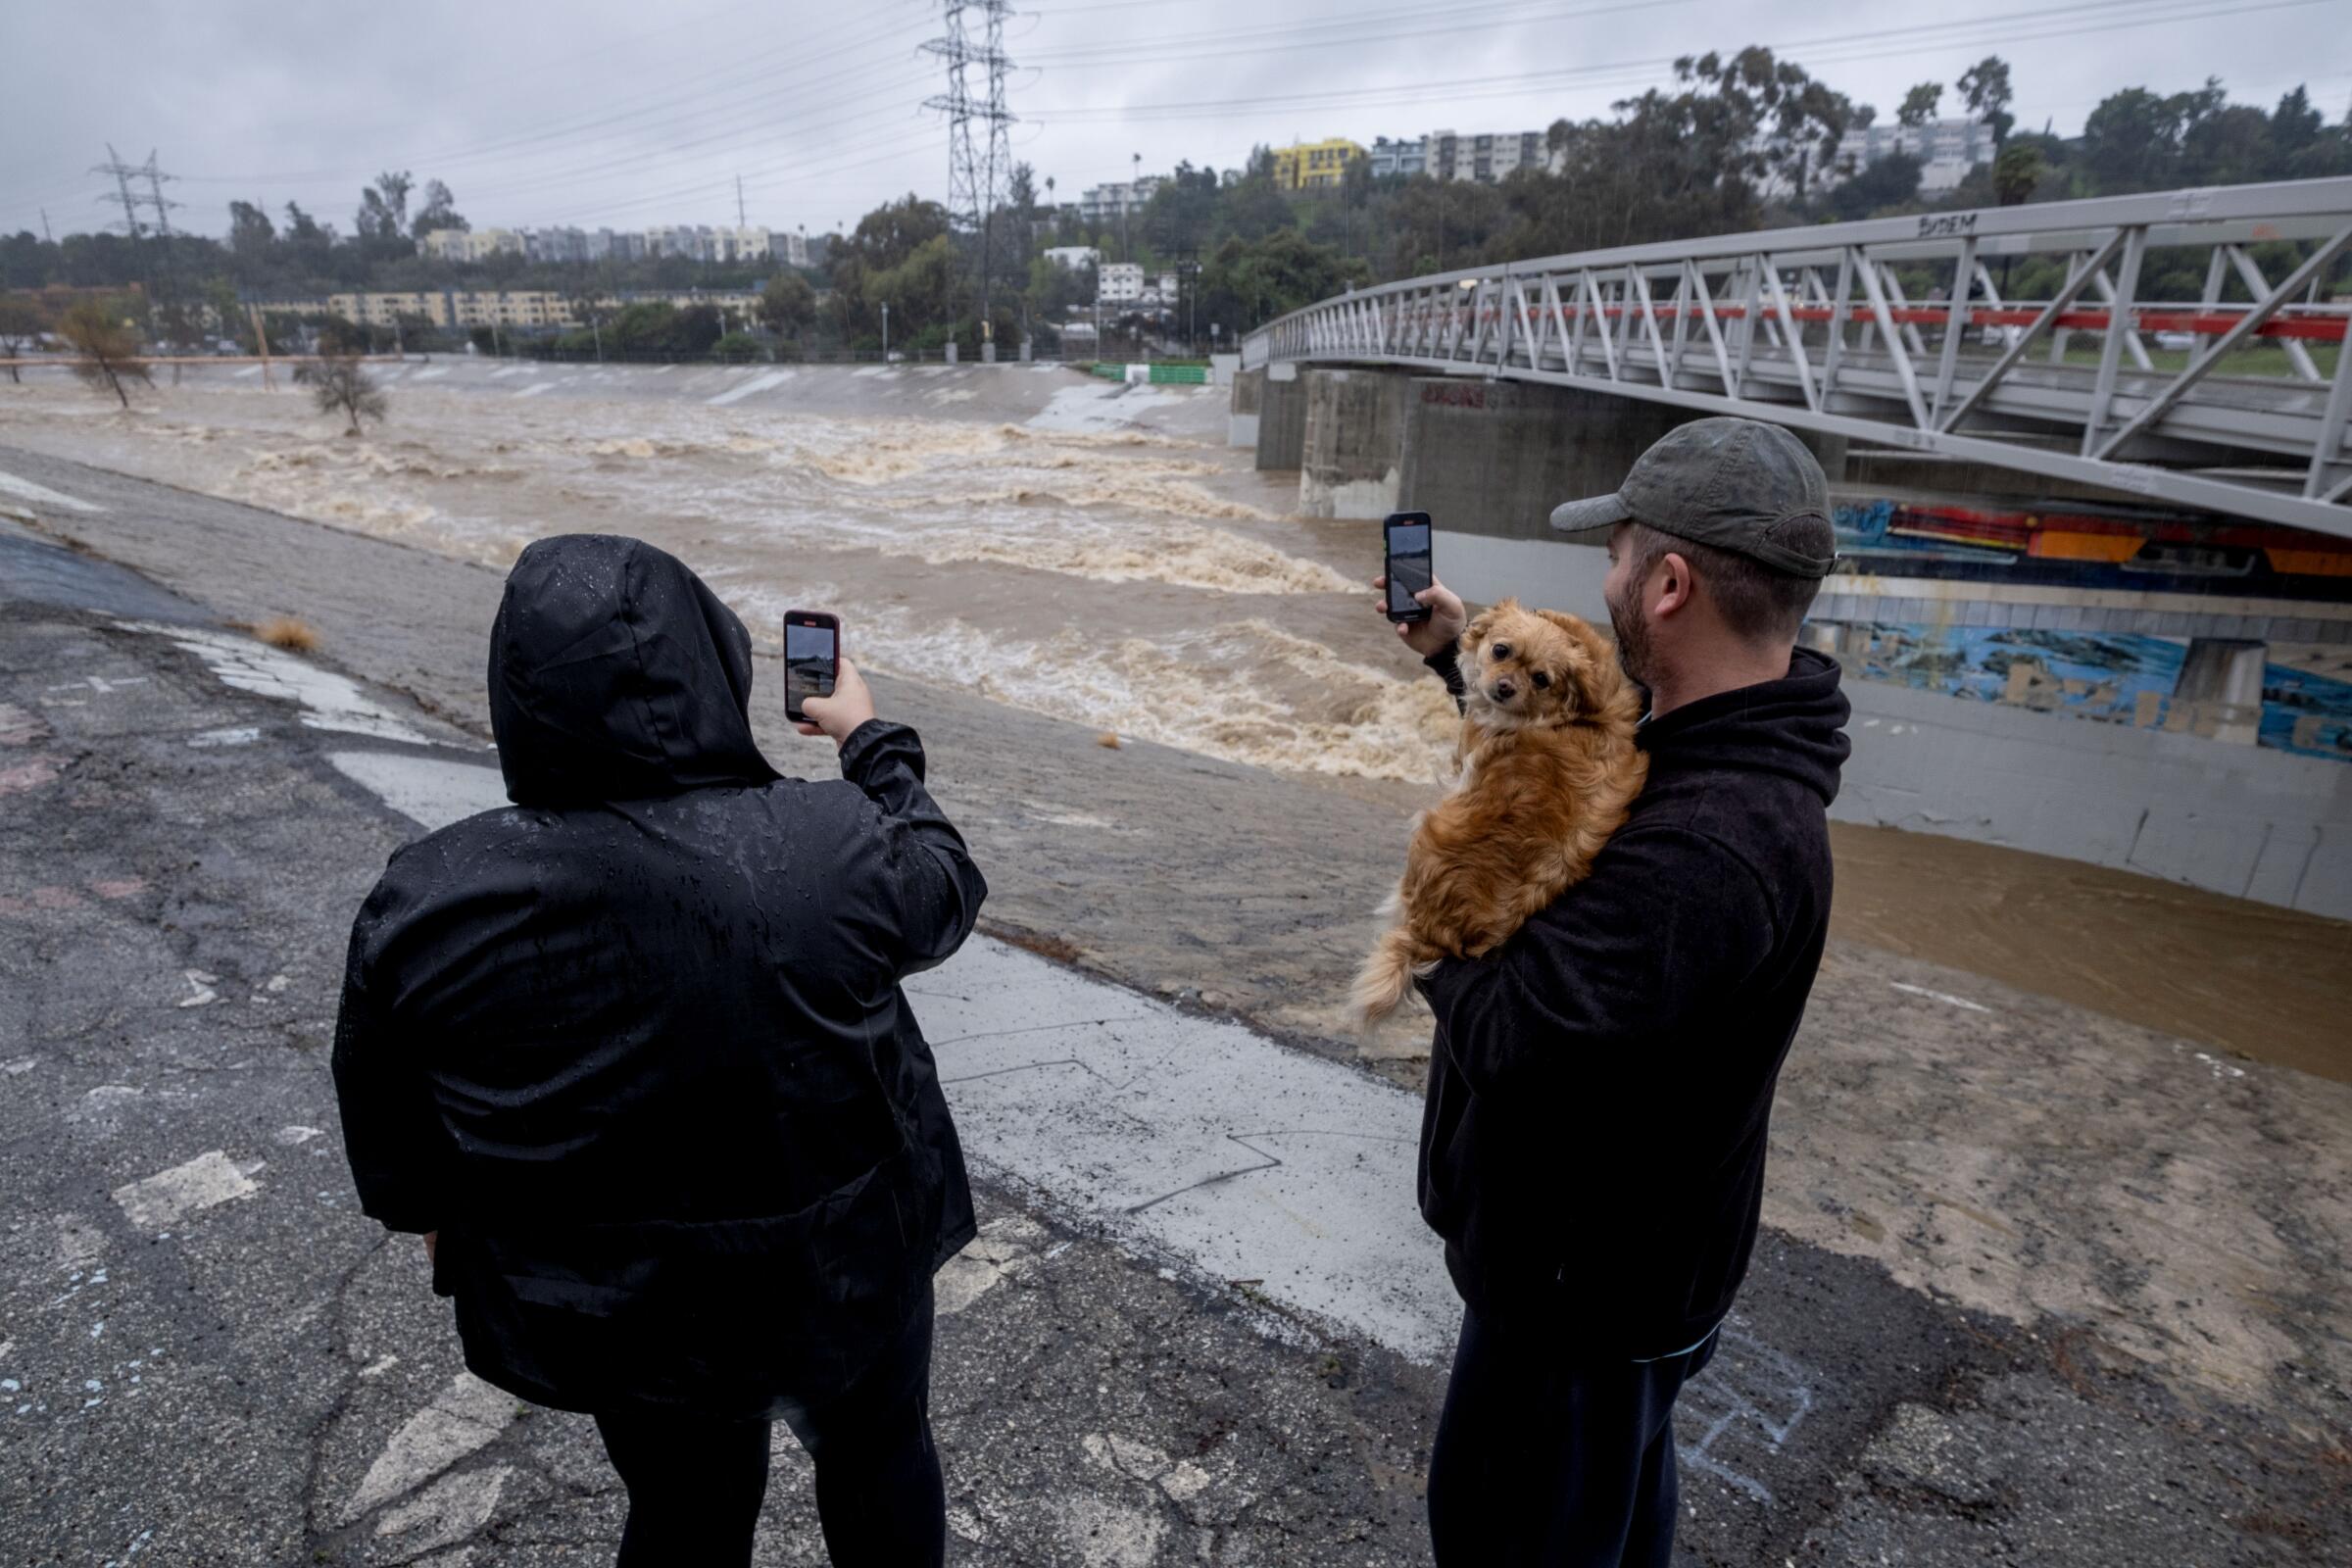 Two people take photos of a rain-swollen river.